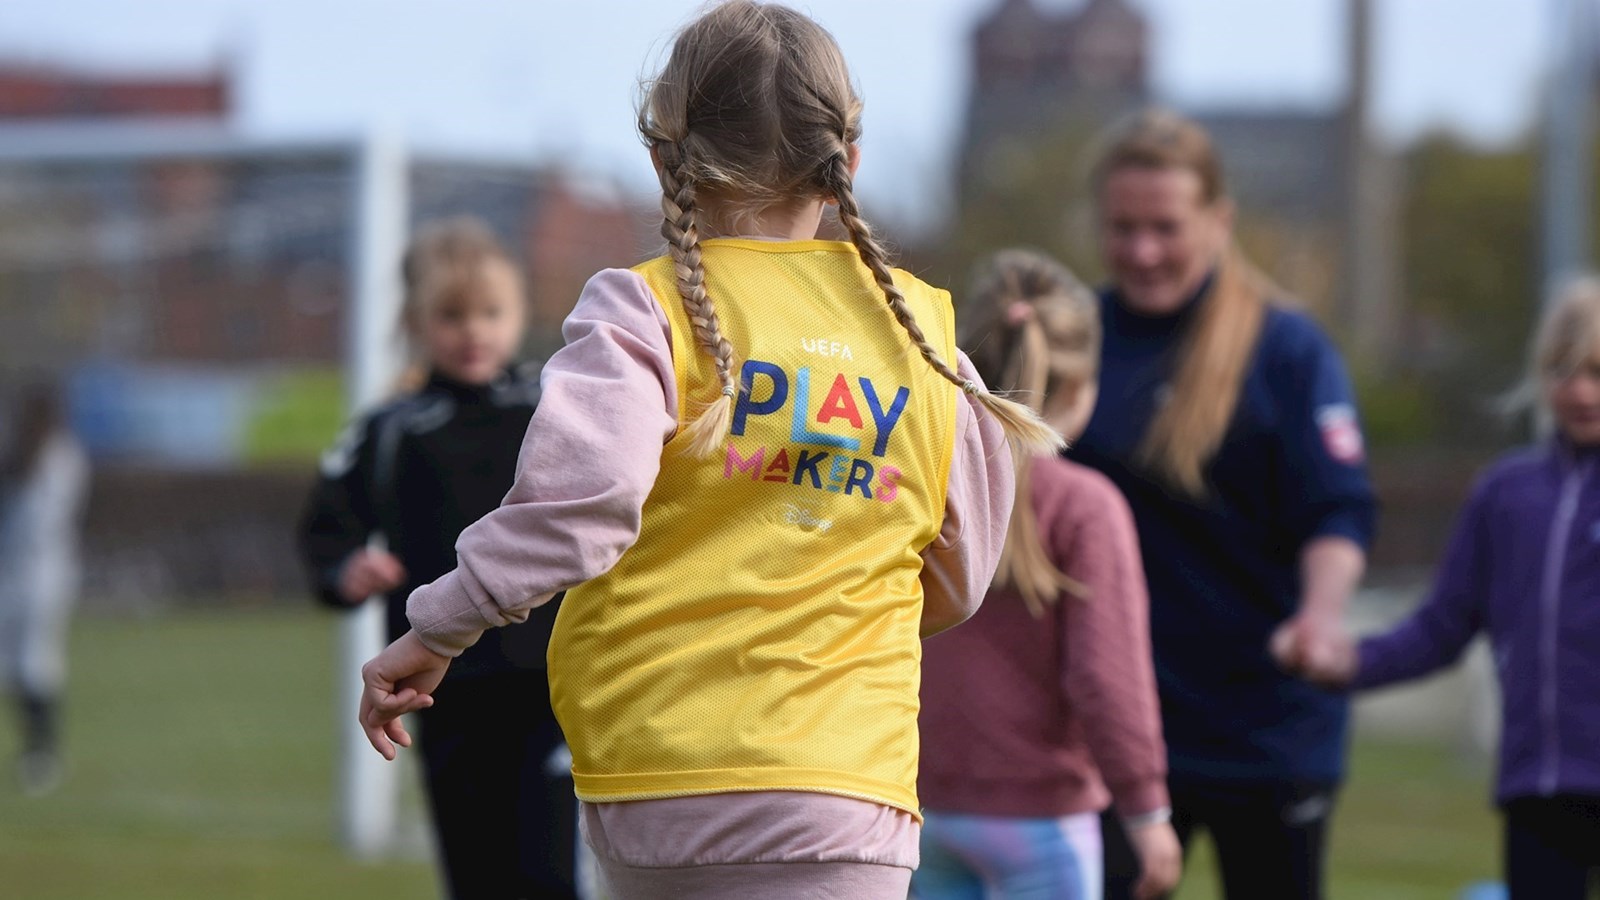 Succes med Playmakers inspired by Disney